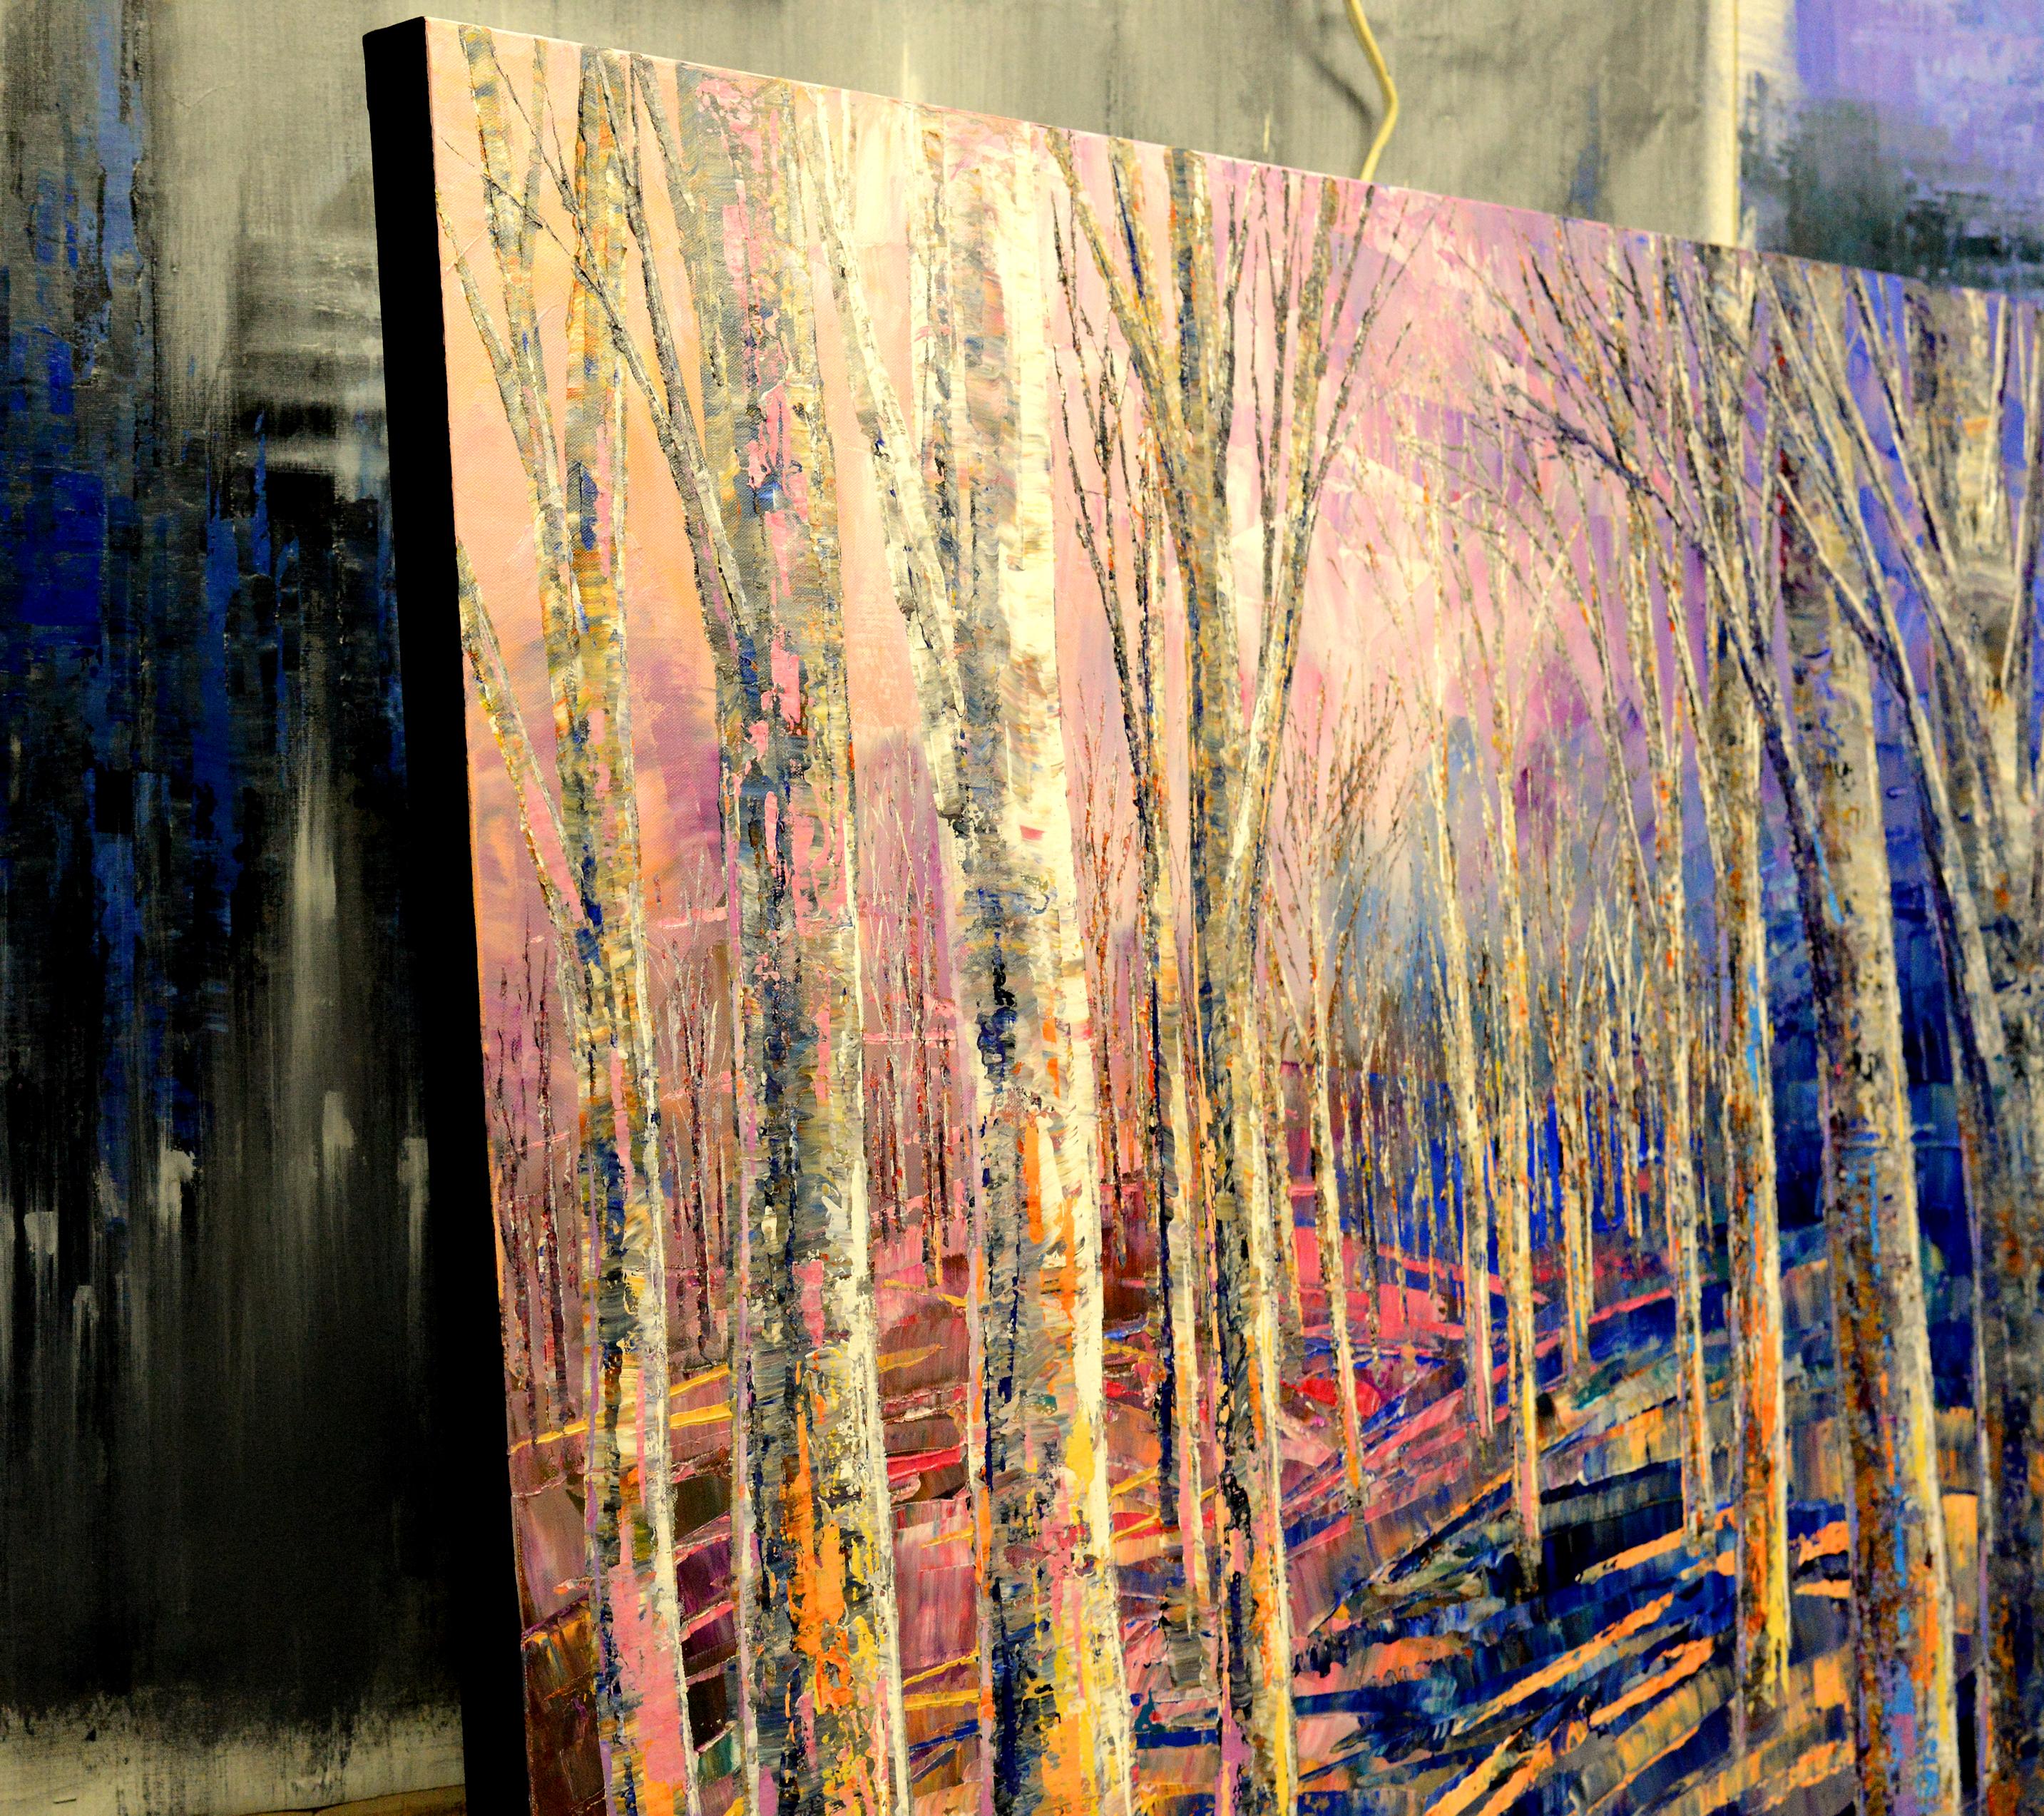 <p>Artist Comments<br />It's my continuing love affair with the forest. Using contrast, I portray the rose of morning rising from the shadows.</p><p>About the Artist<br />Russian-born Tatiana Iliina lives in Montreal and has sold paintings to